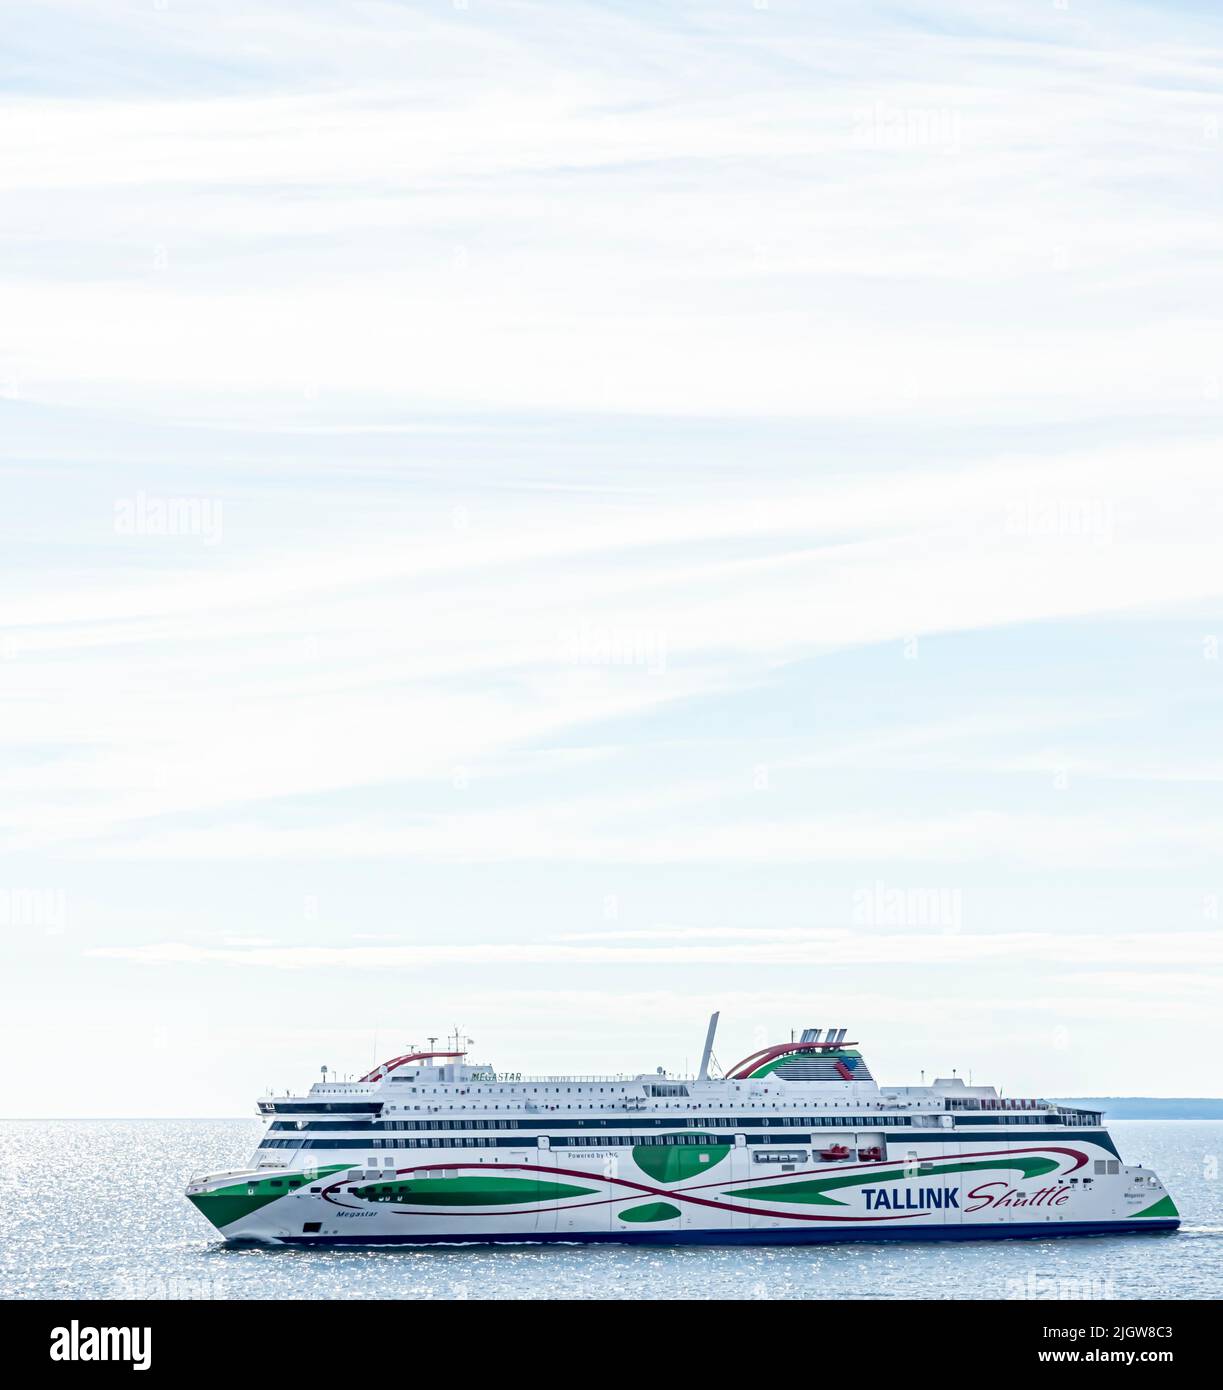 The Tallink ropax ferry m/s Megastar in the Gulf of Finland on a summer day. Room for text. Stock Photo